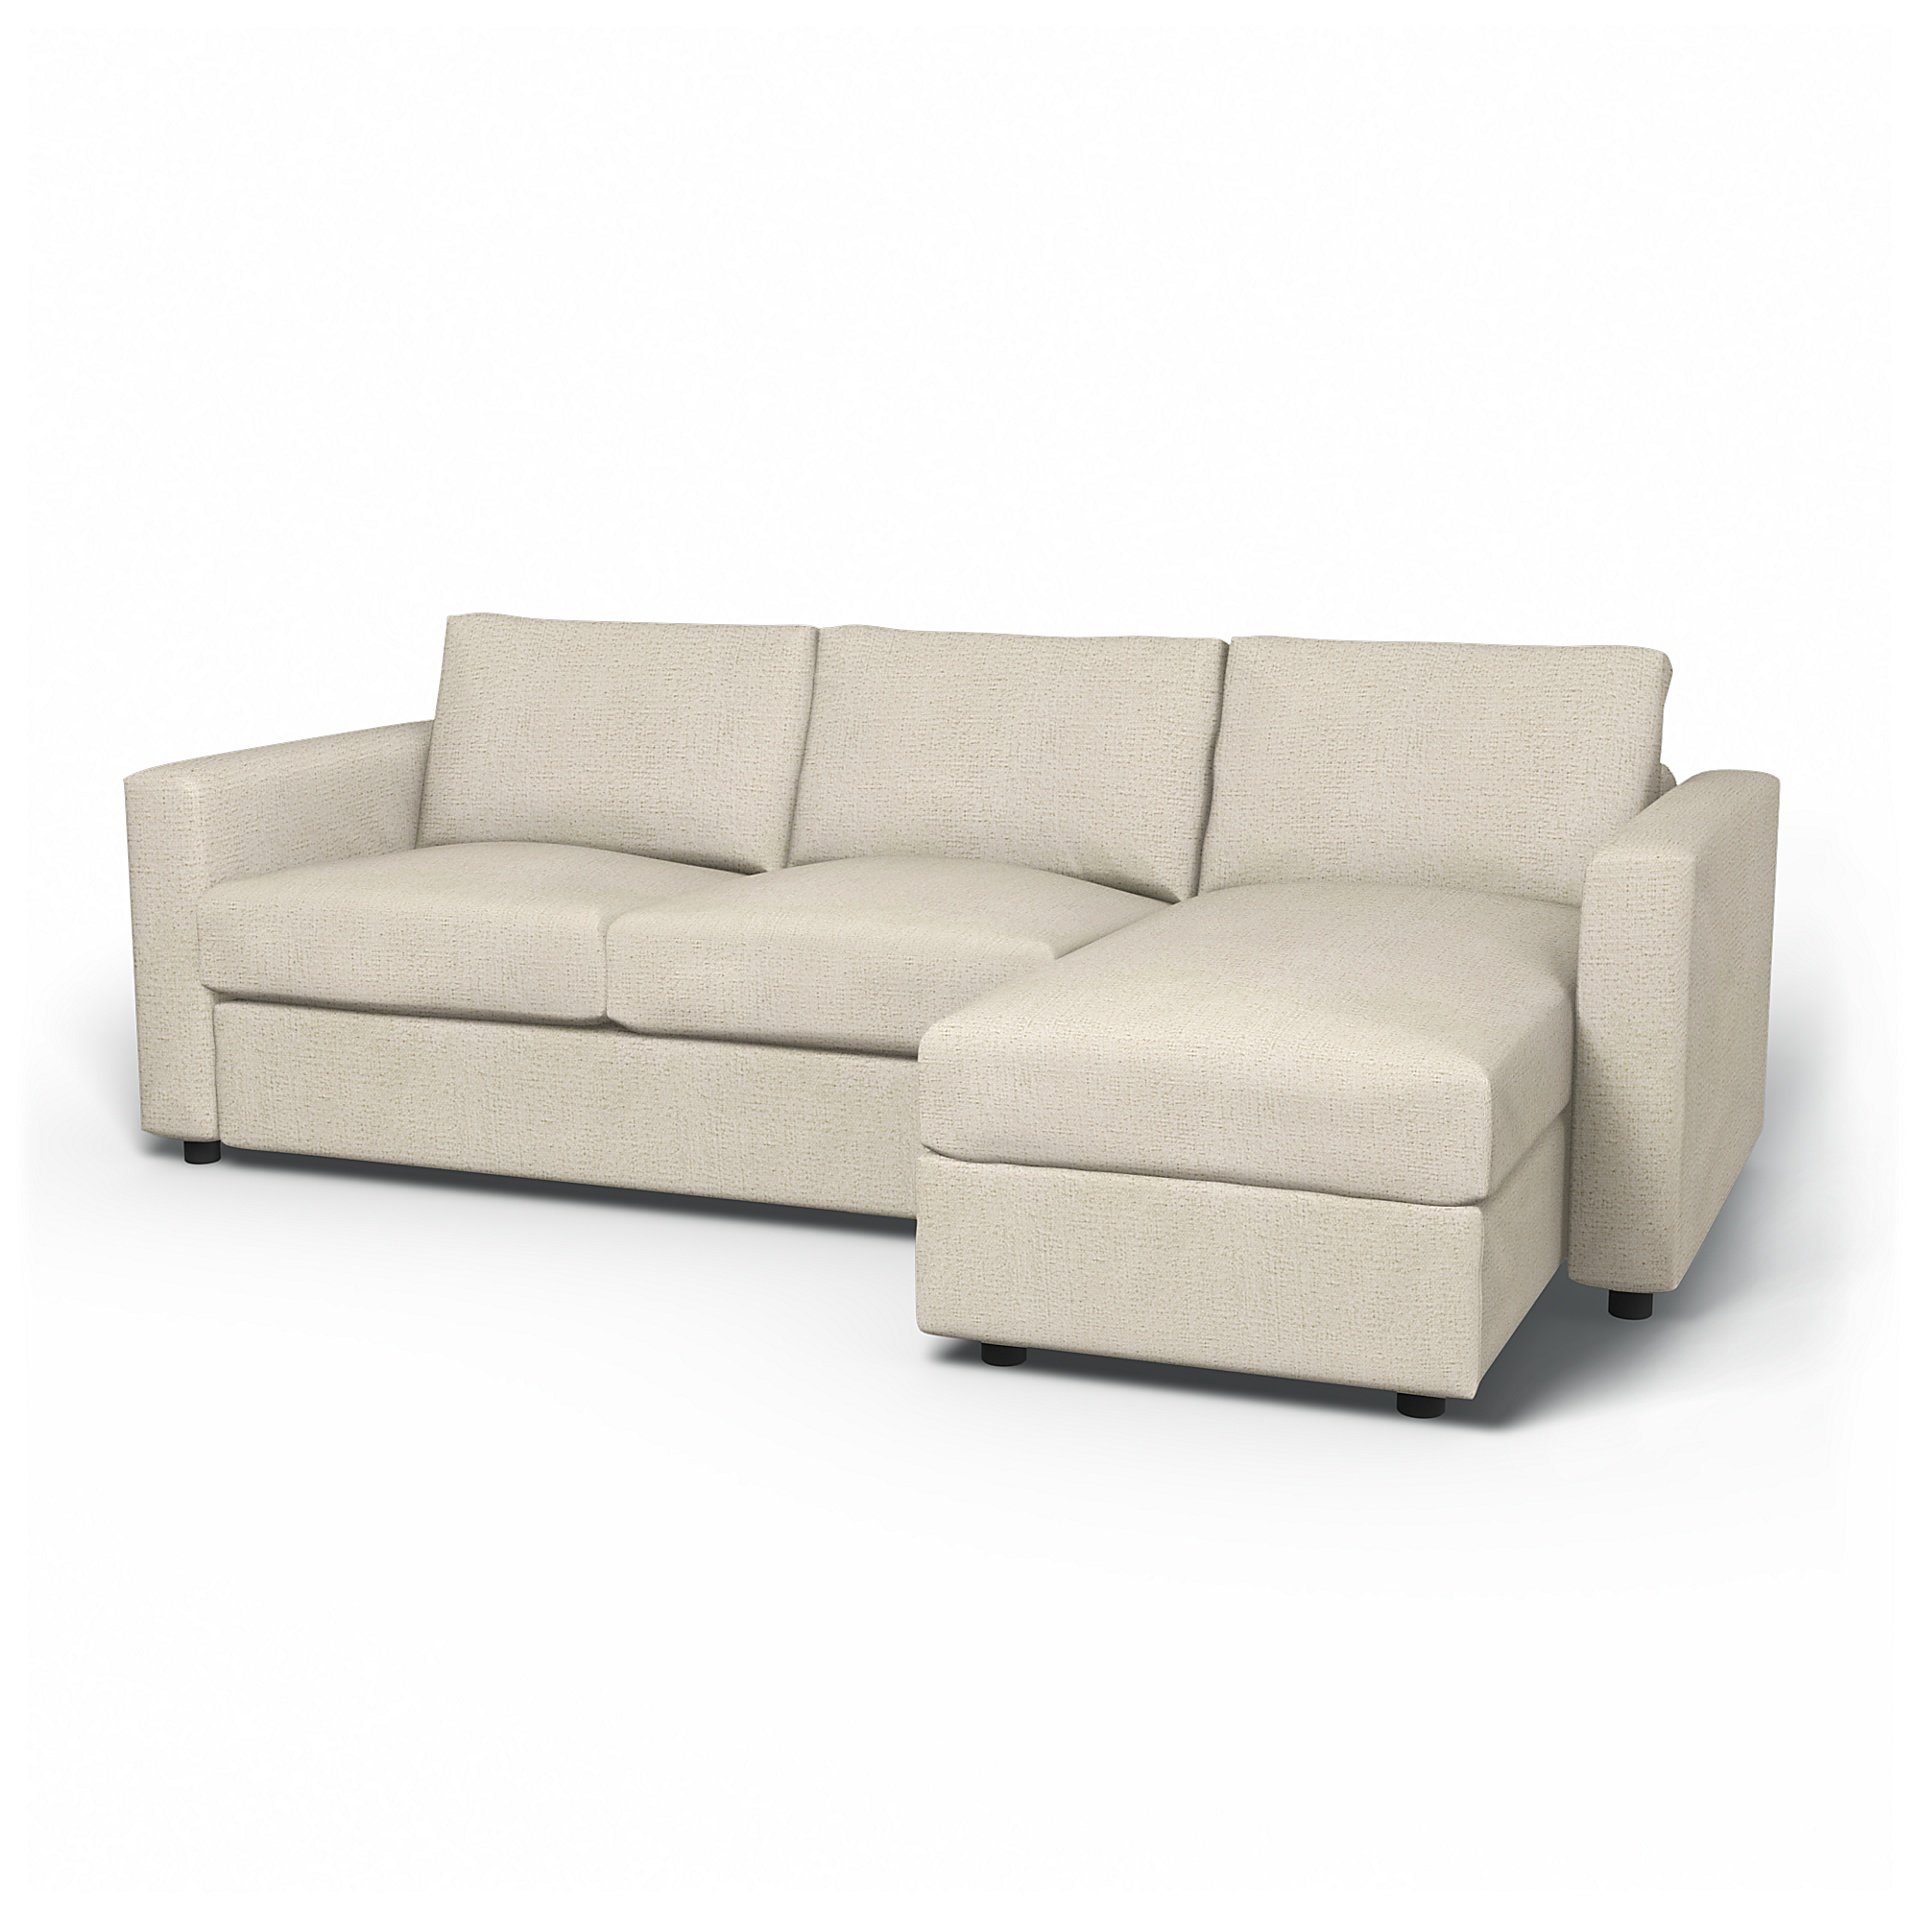 IKEA - Vimle 2 Seater Sofa with Chaise Cover, Ecru, Boucle & Texture - Bemz